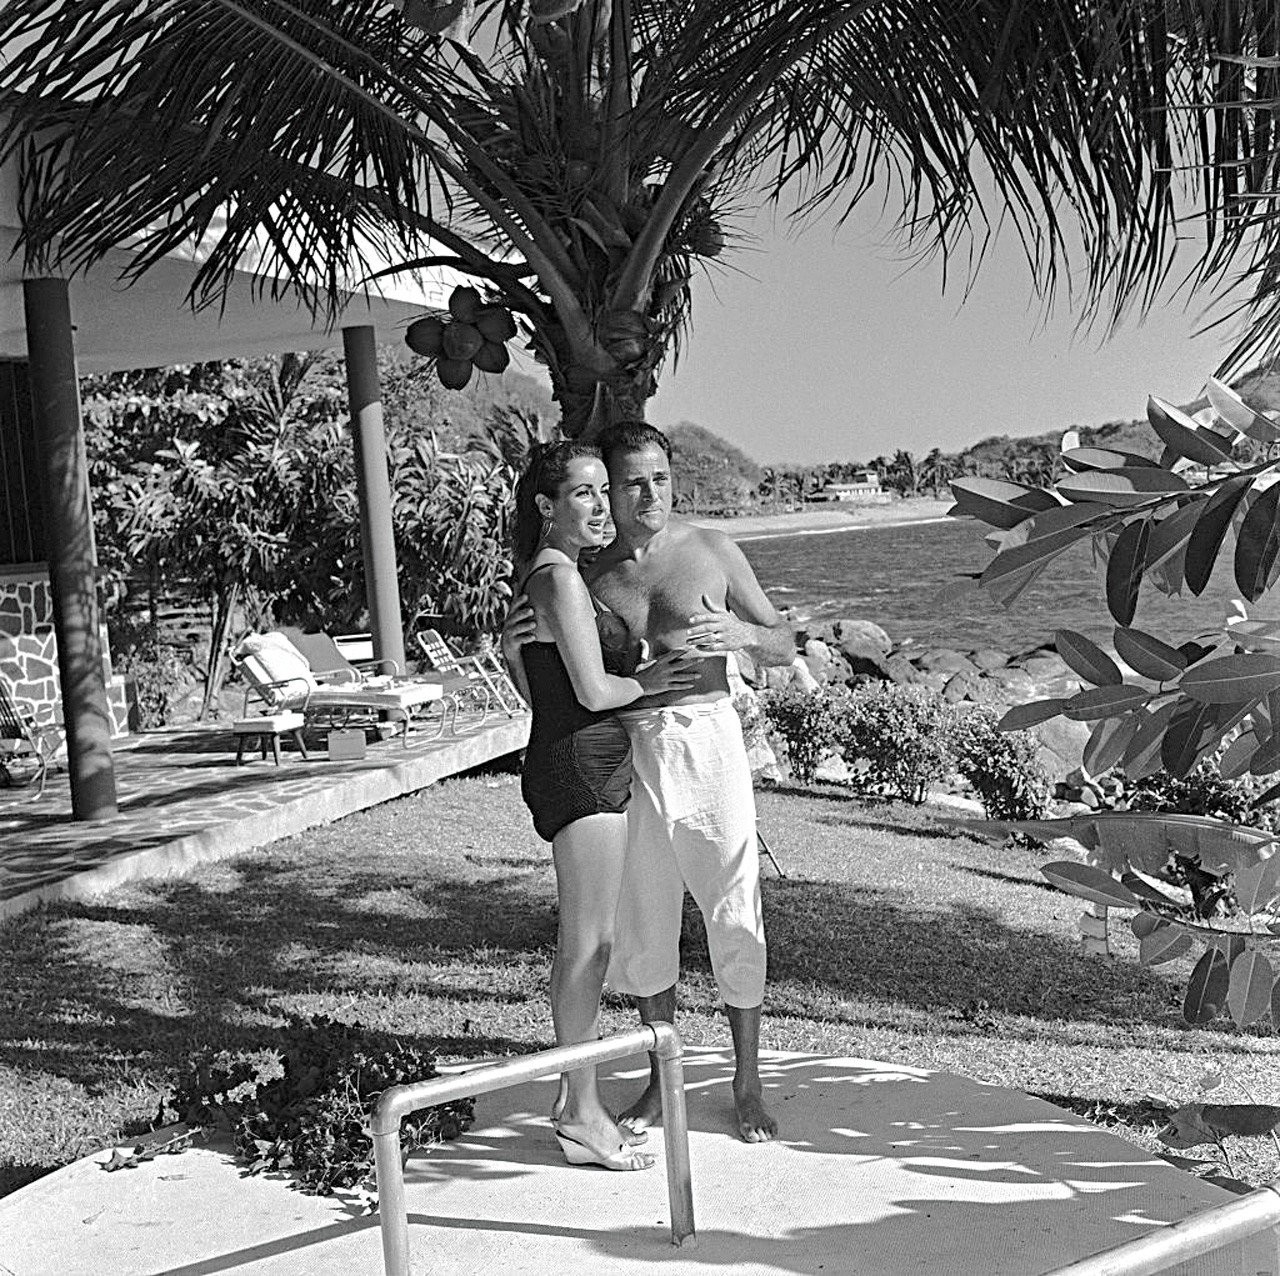 acapulco-mexico-picture-shows-mike-todd-and-elizabeth-news-photo-1655414931.jpg